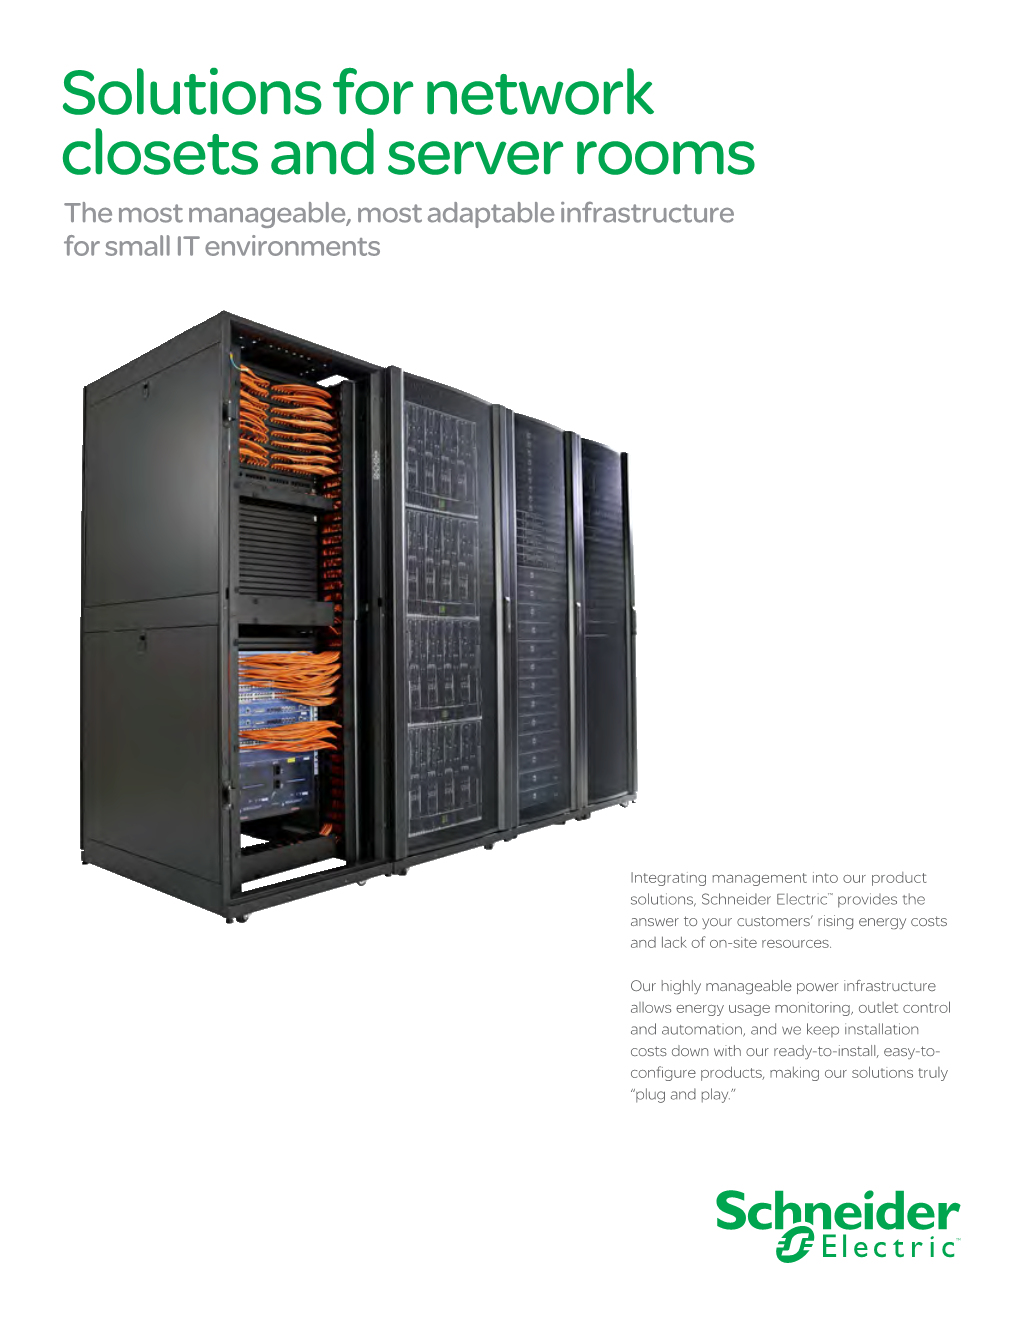 Solutions for Network Closets and Server Rooms the Most Manageable, Most Adaptable Infrastructure for Small IT Environments